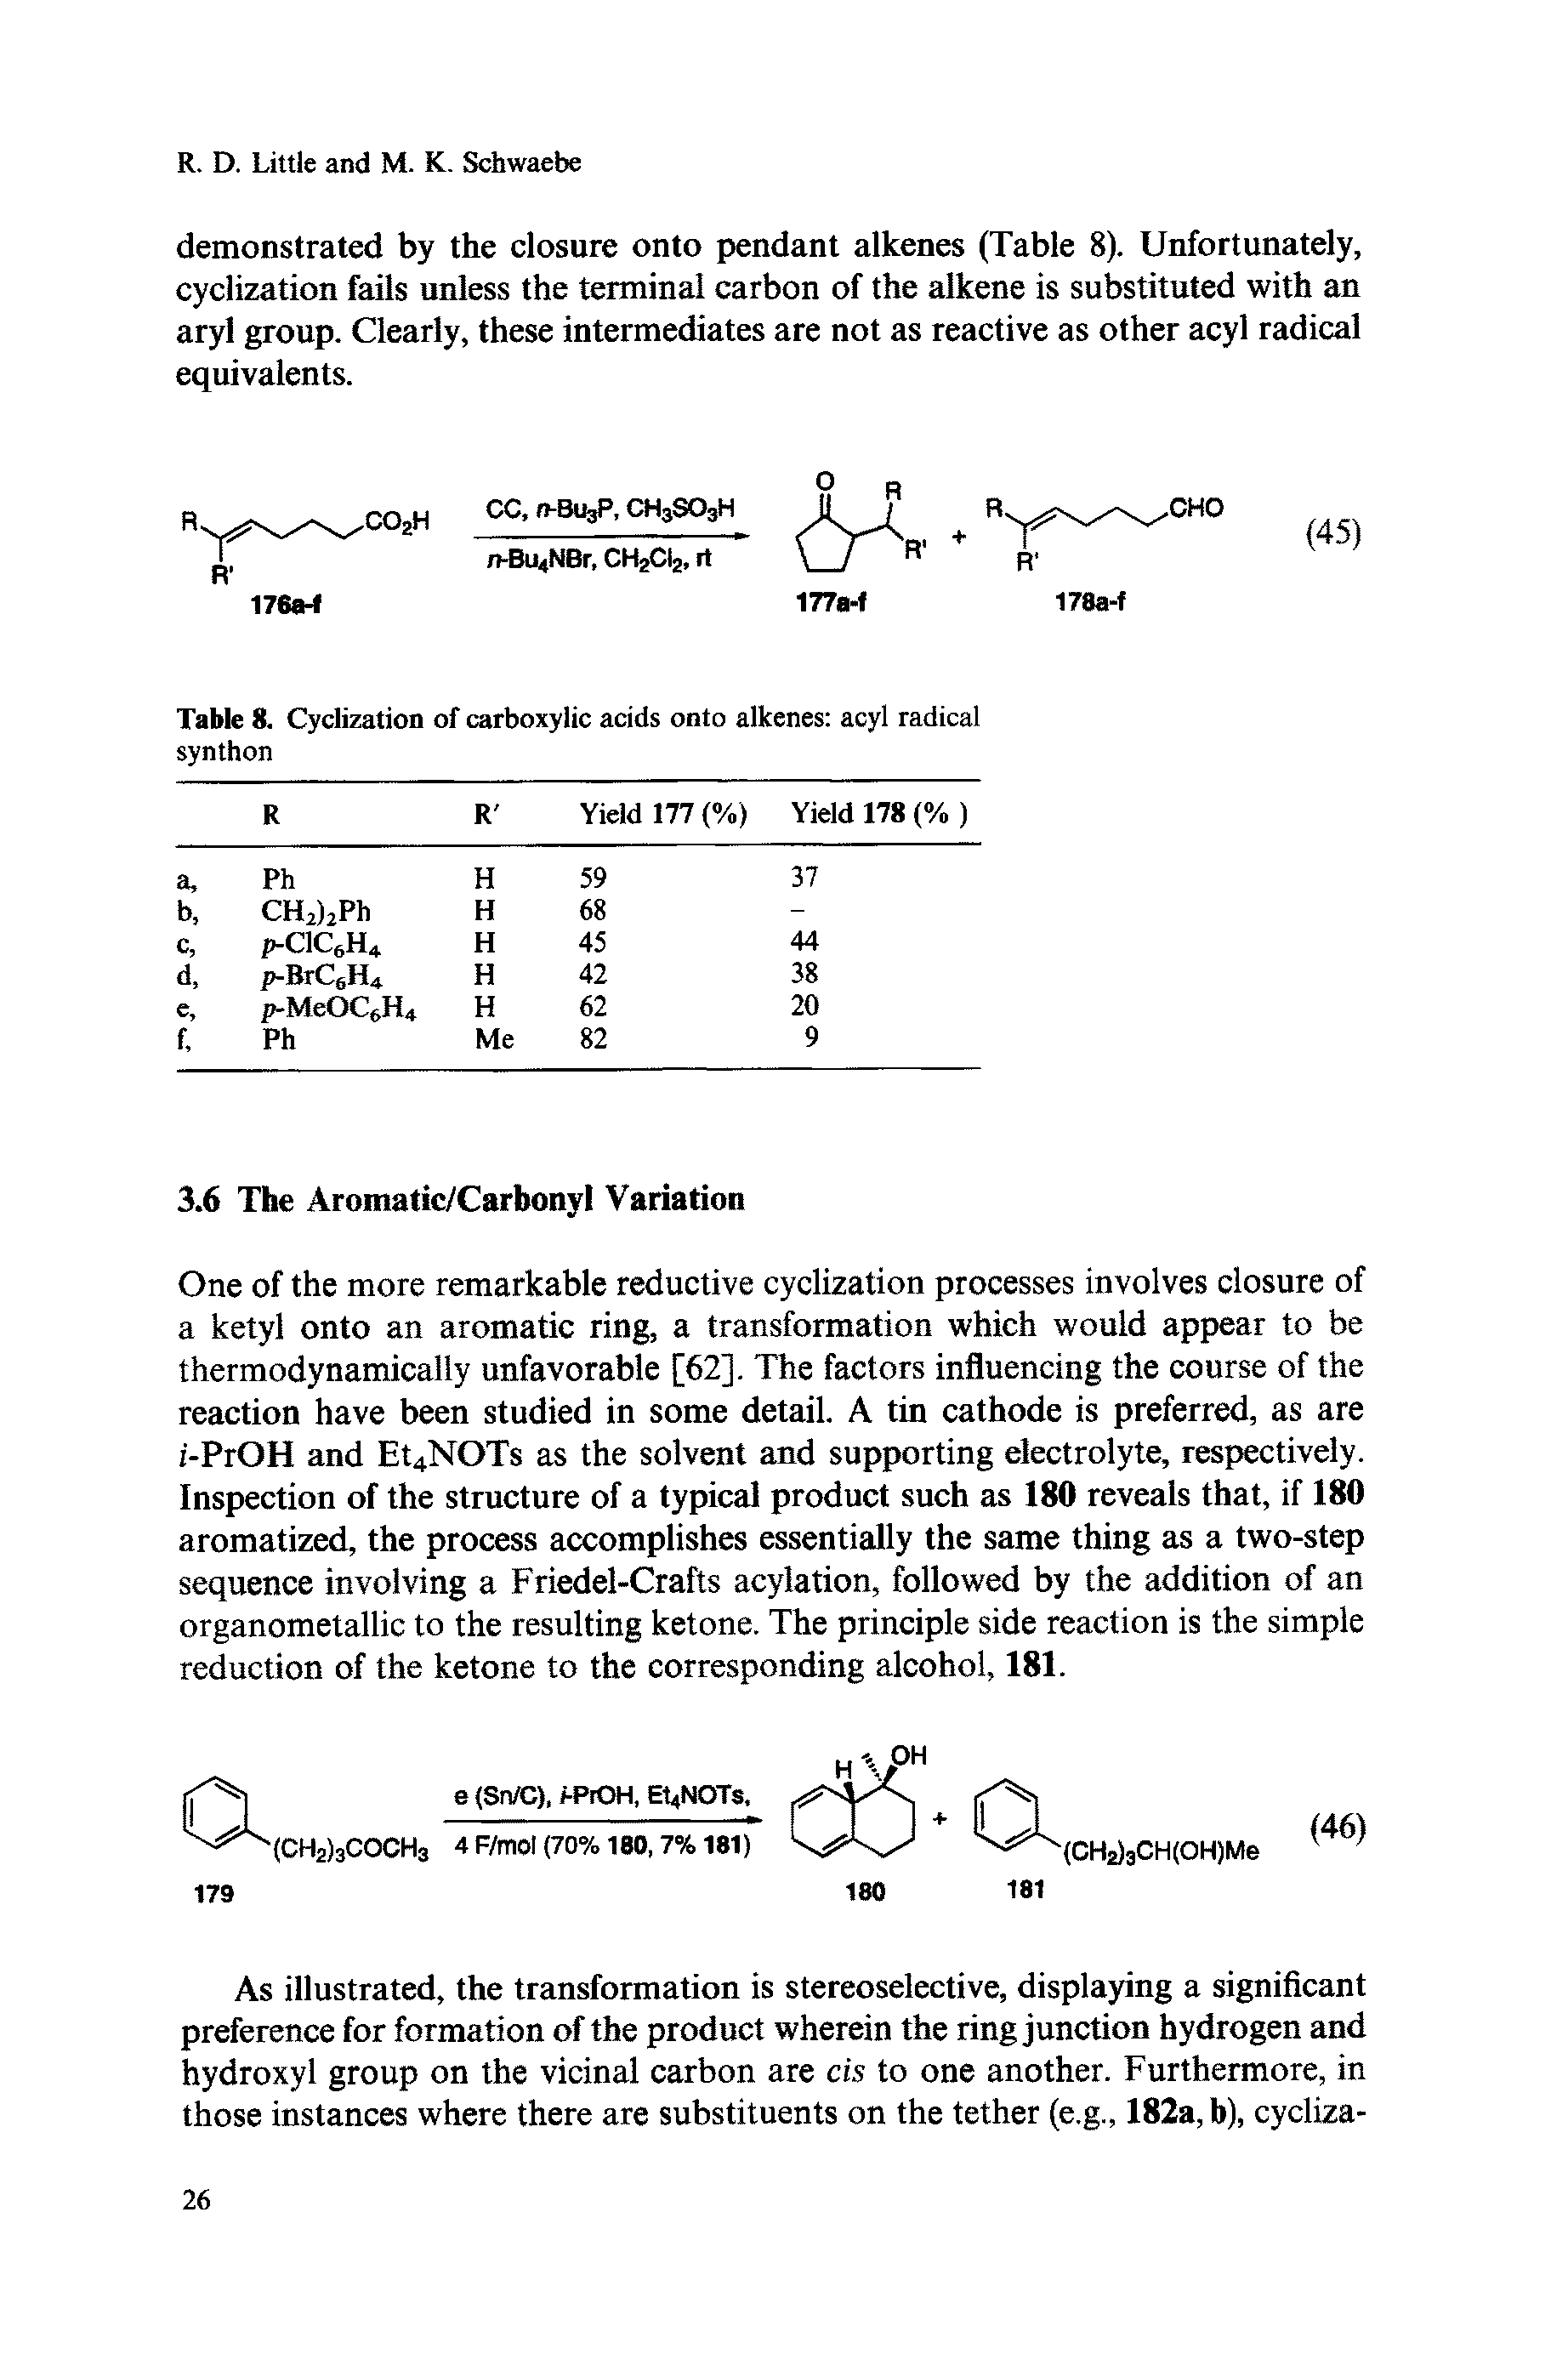 Table 8. Cyclization of carboxylic acids onto alkenes acyl radical synthon...